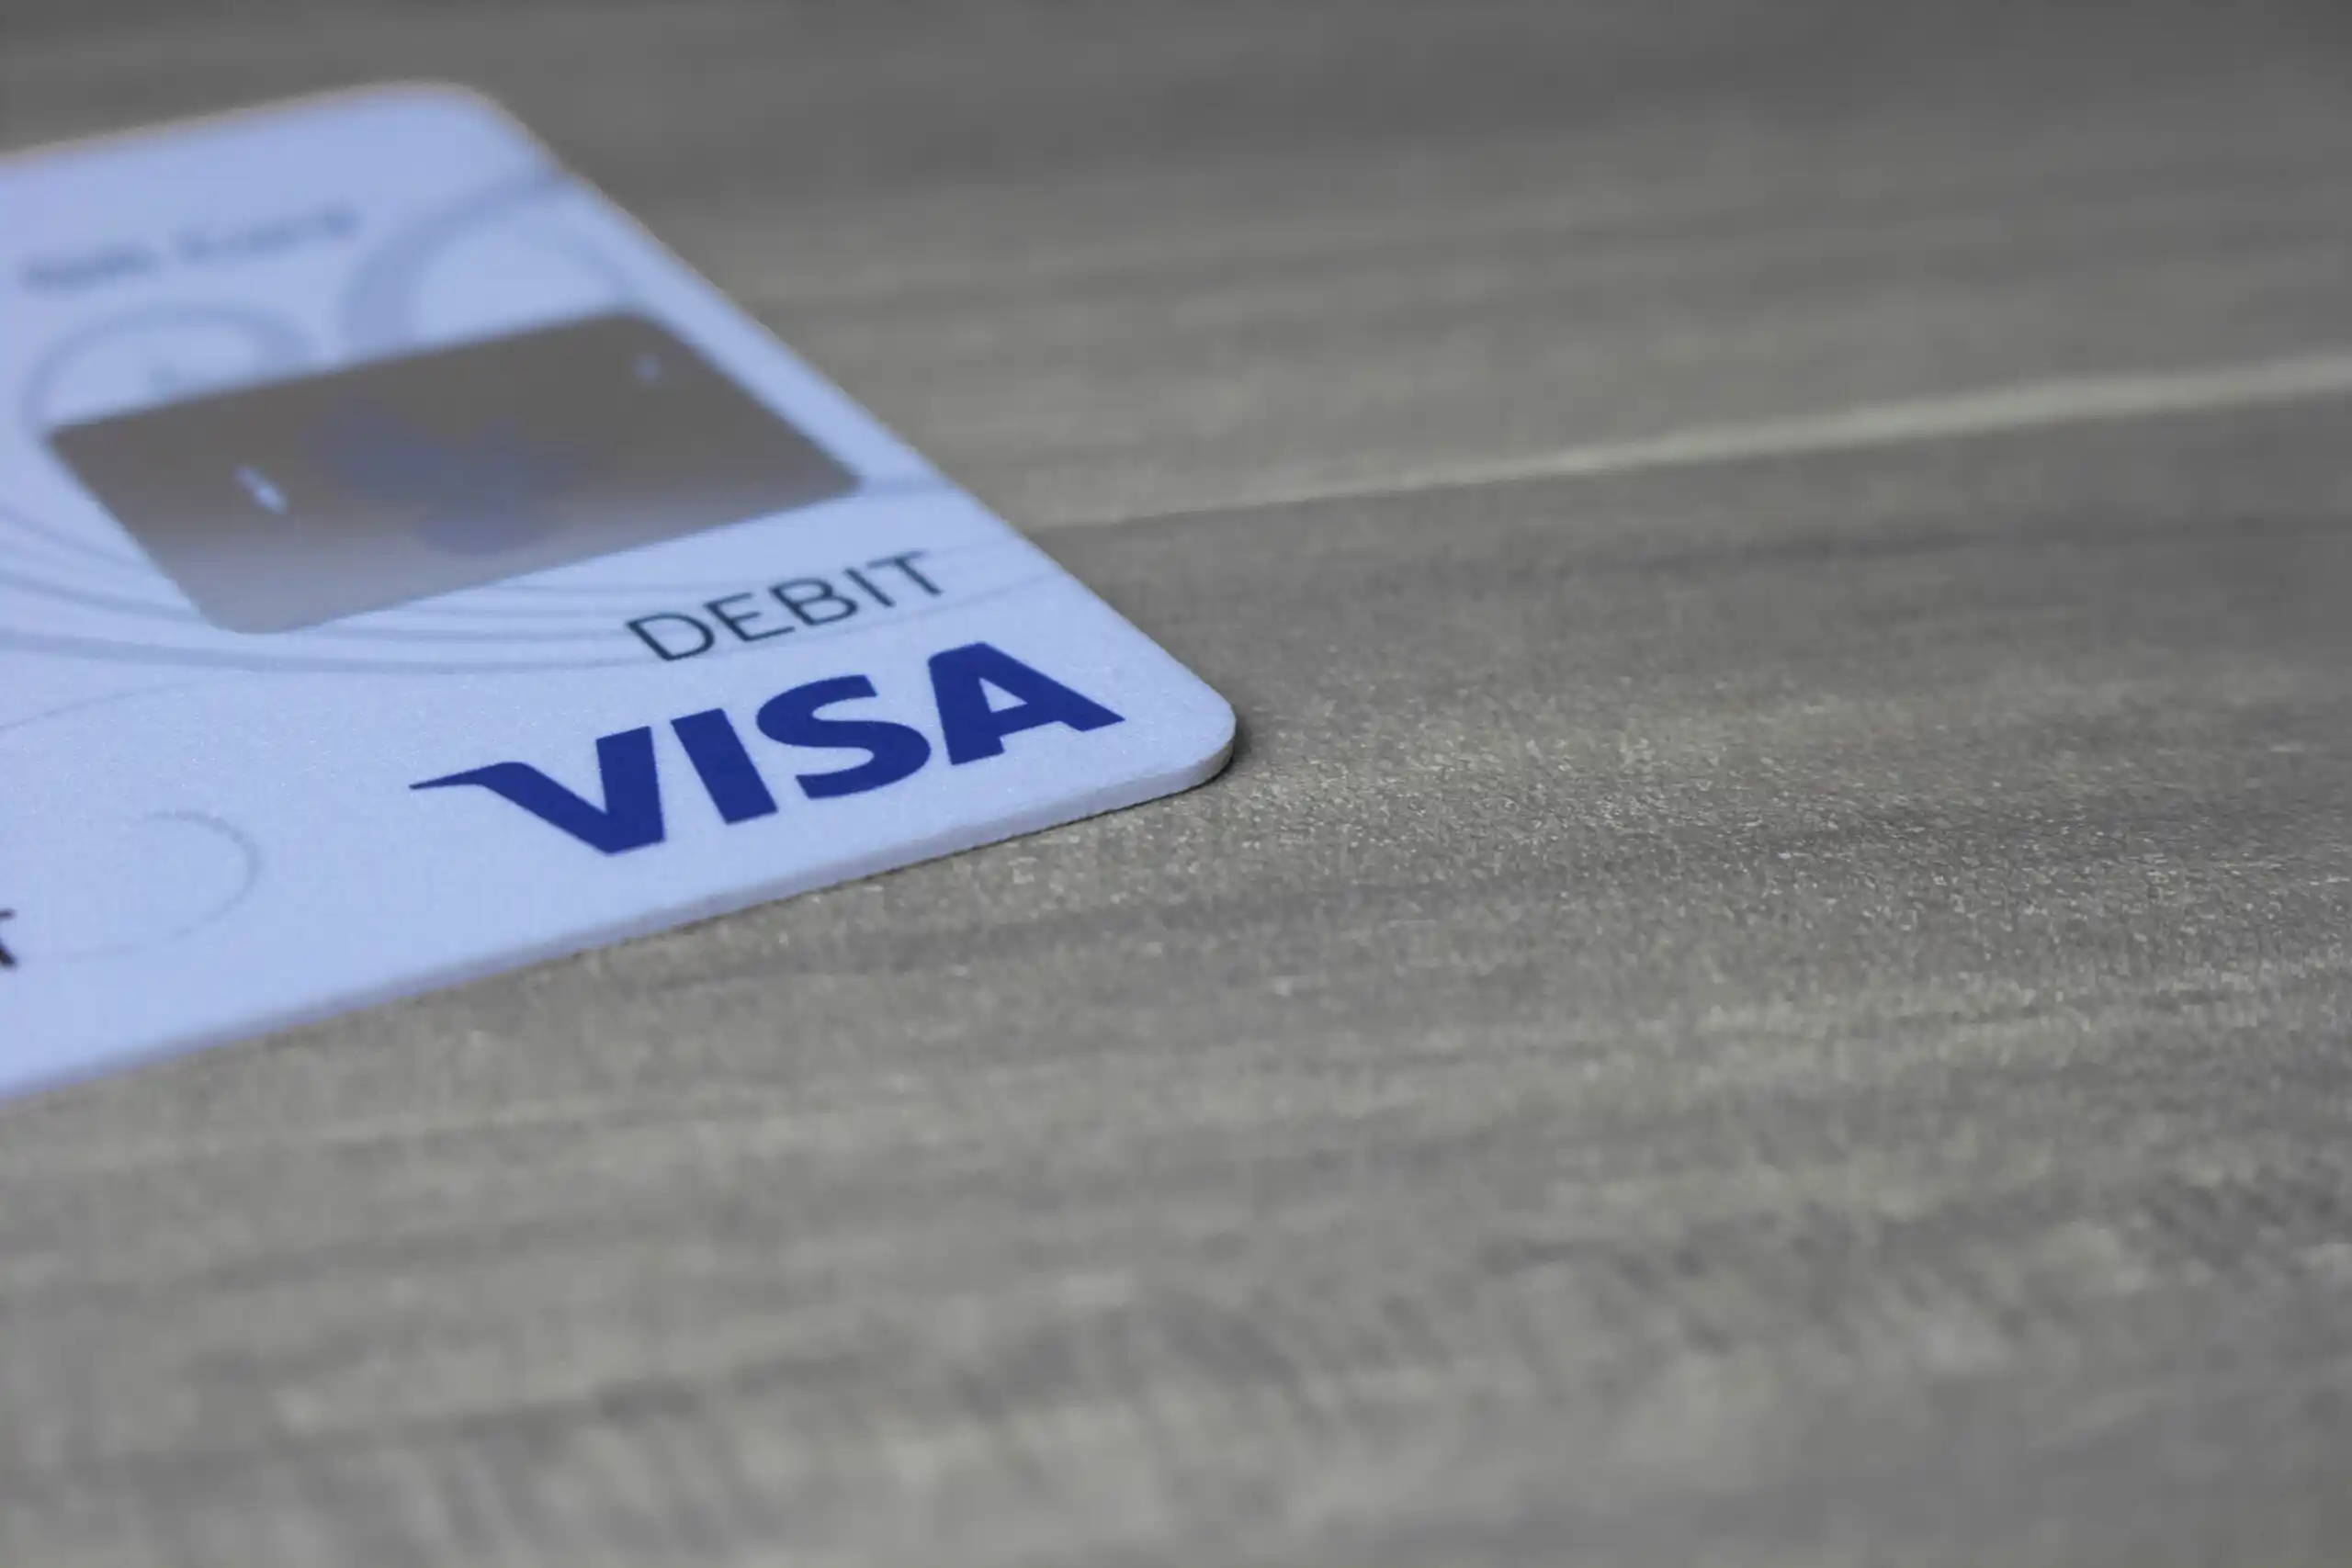 Economic Impact Payment Cards, Explained (Don’t Lose Yours)